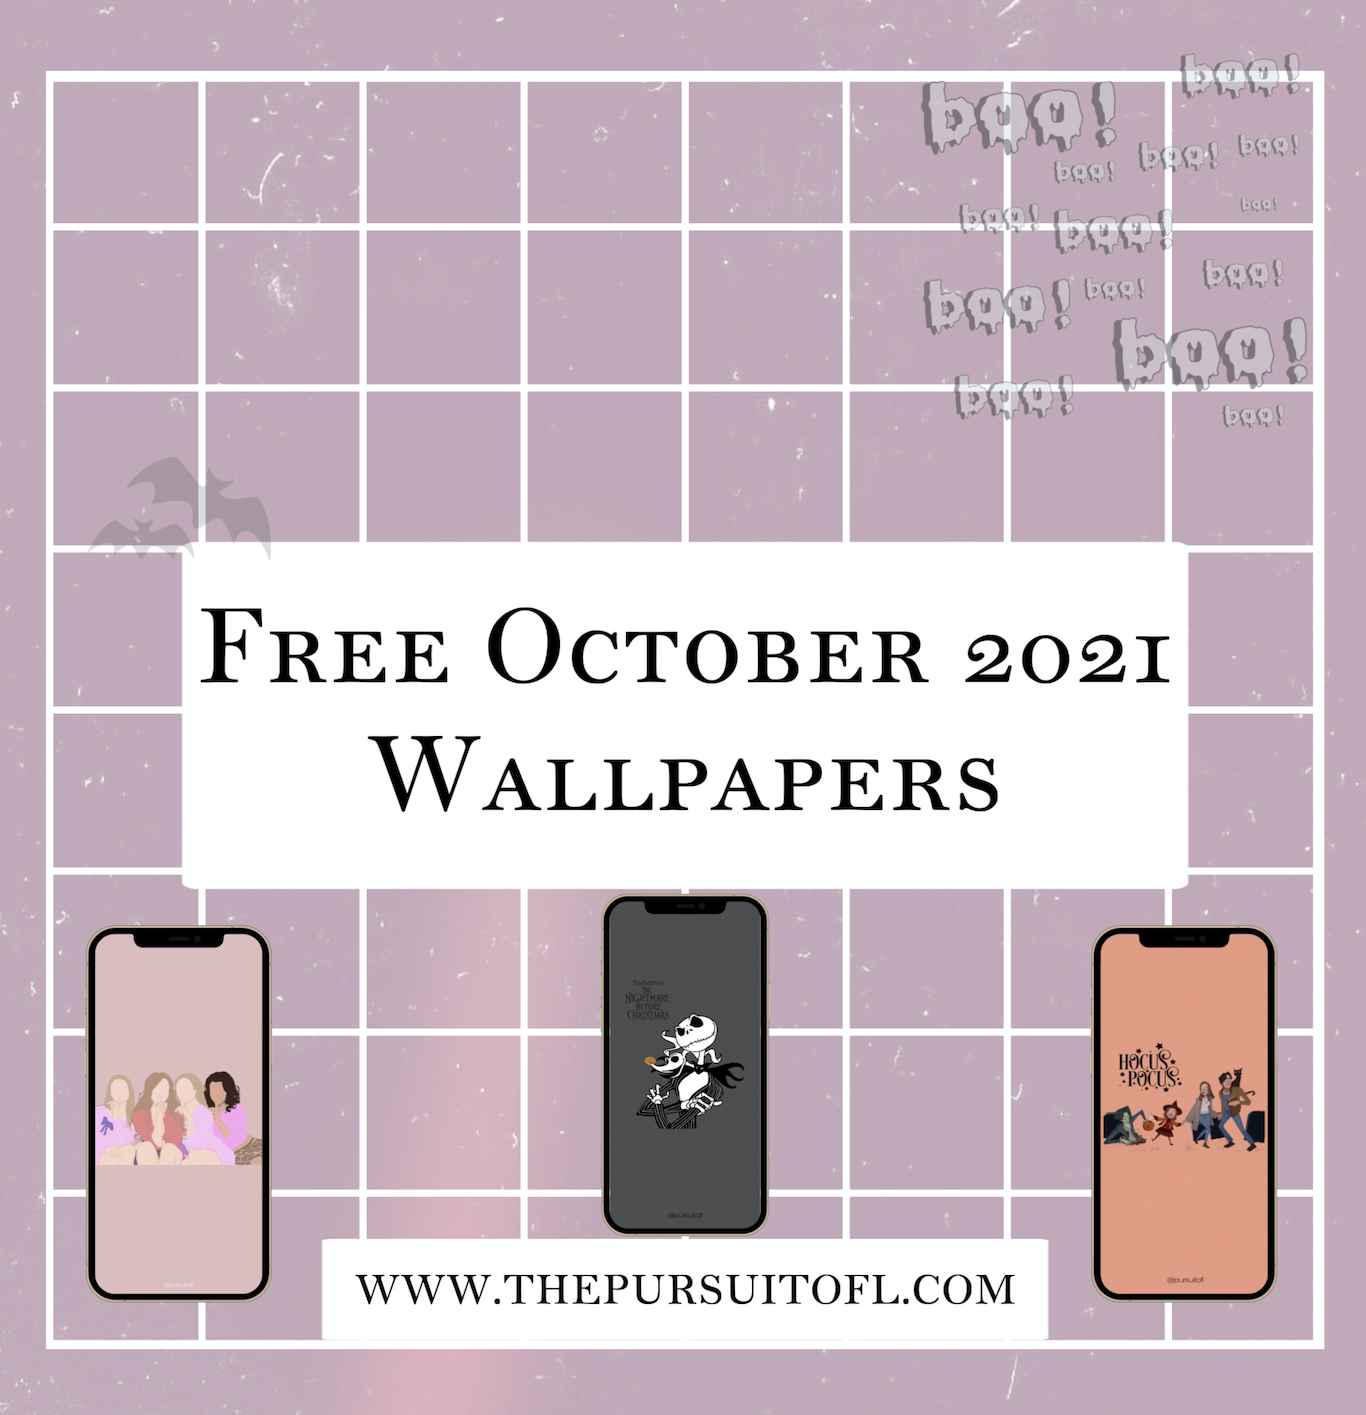 Free October 2021 Wallpapers